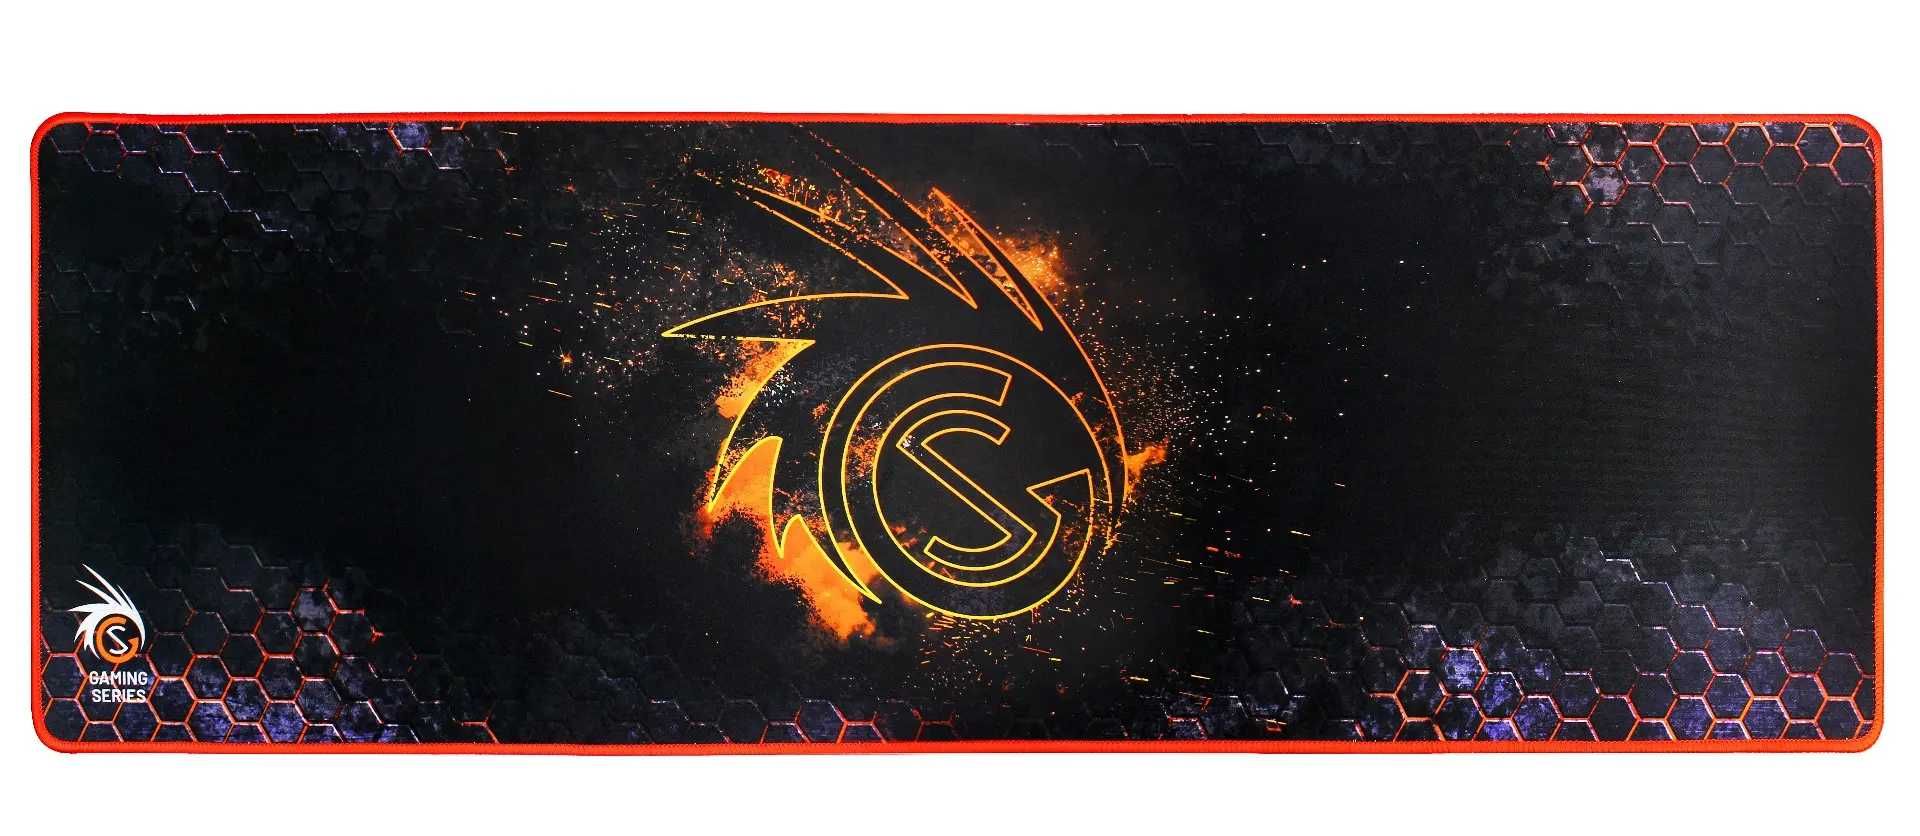 Casti Gaming PC/PS4/PS5 White Shark GH-1841 LION/mouse pad 600x300x3mm